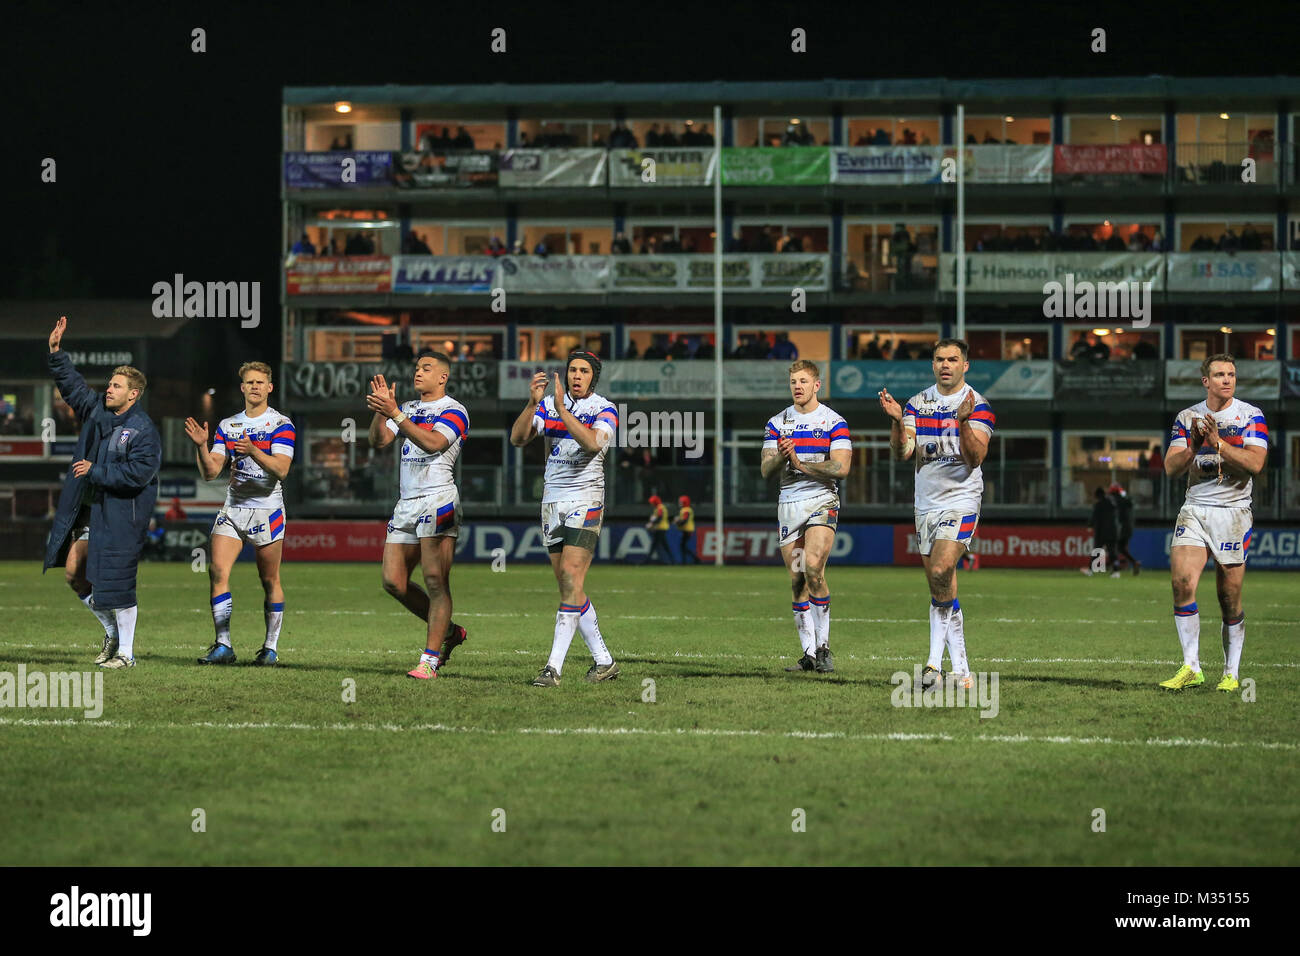 Wakefield Trinity team applaud the fans after wining the game 14-12 during the Betfred Super League Round 2 Wakefield versus Salford Red Devils 09/02/2018 at the Mobile Rocket Stadium Stock Photo